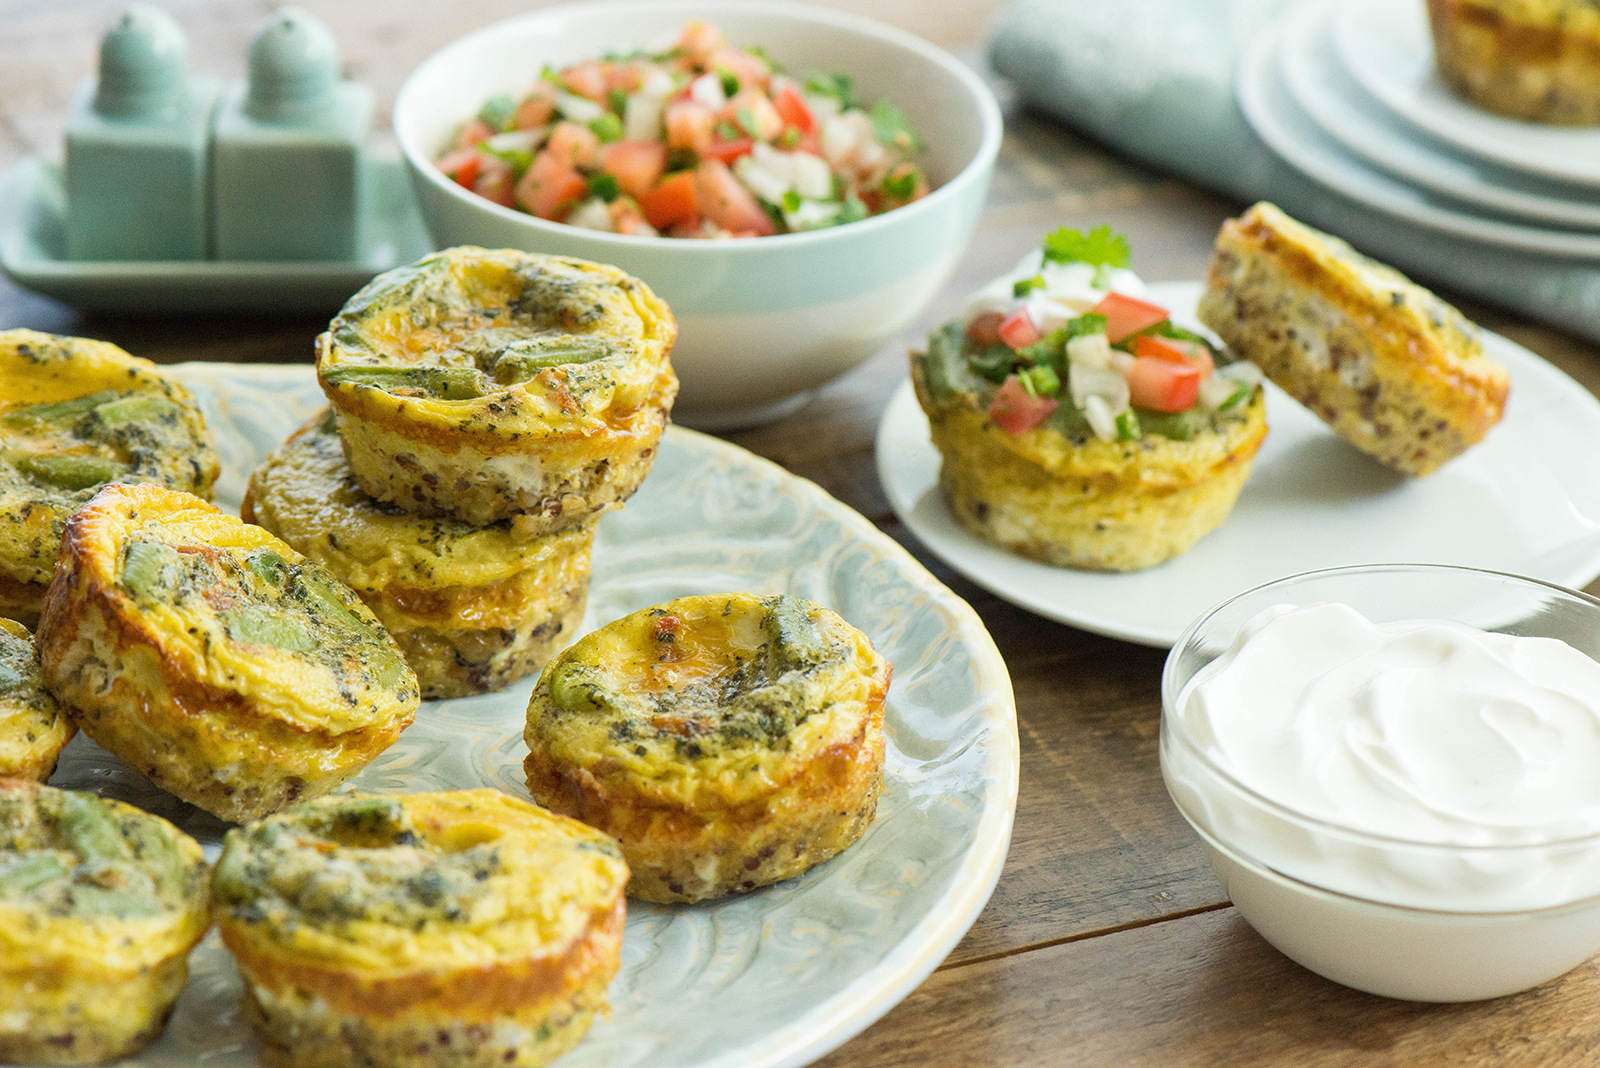 Mini Bulgur and Quinoa Frittatas with Green Beans and Dried Tomatoes